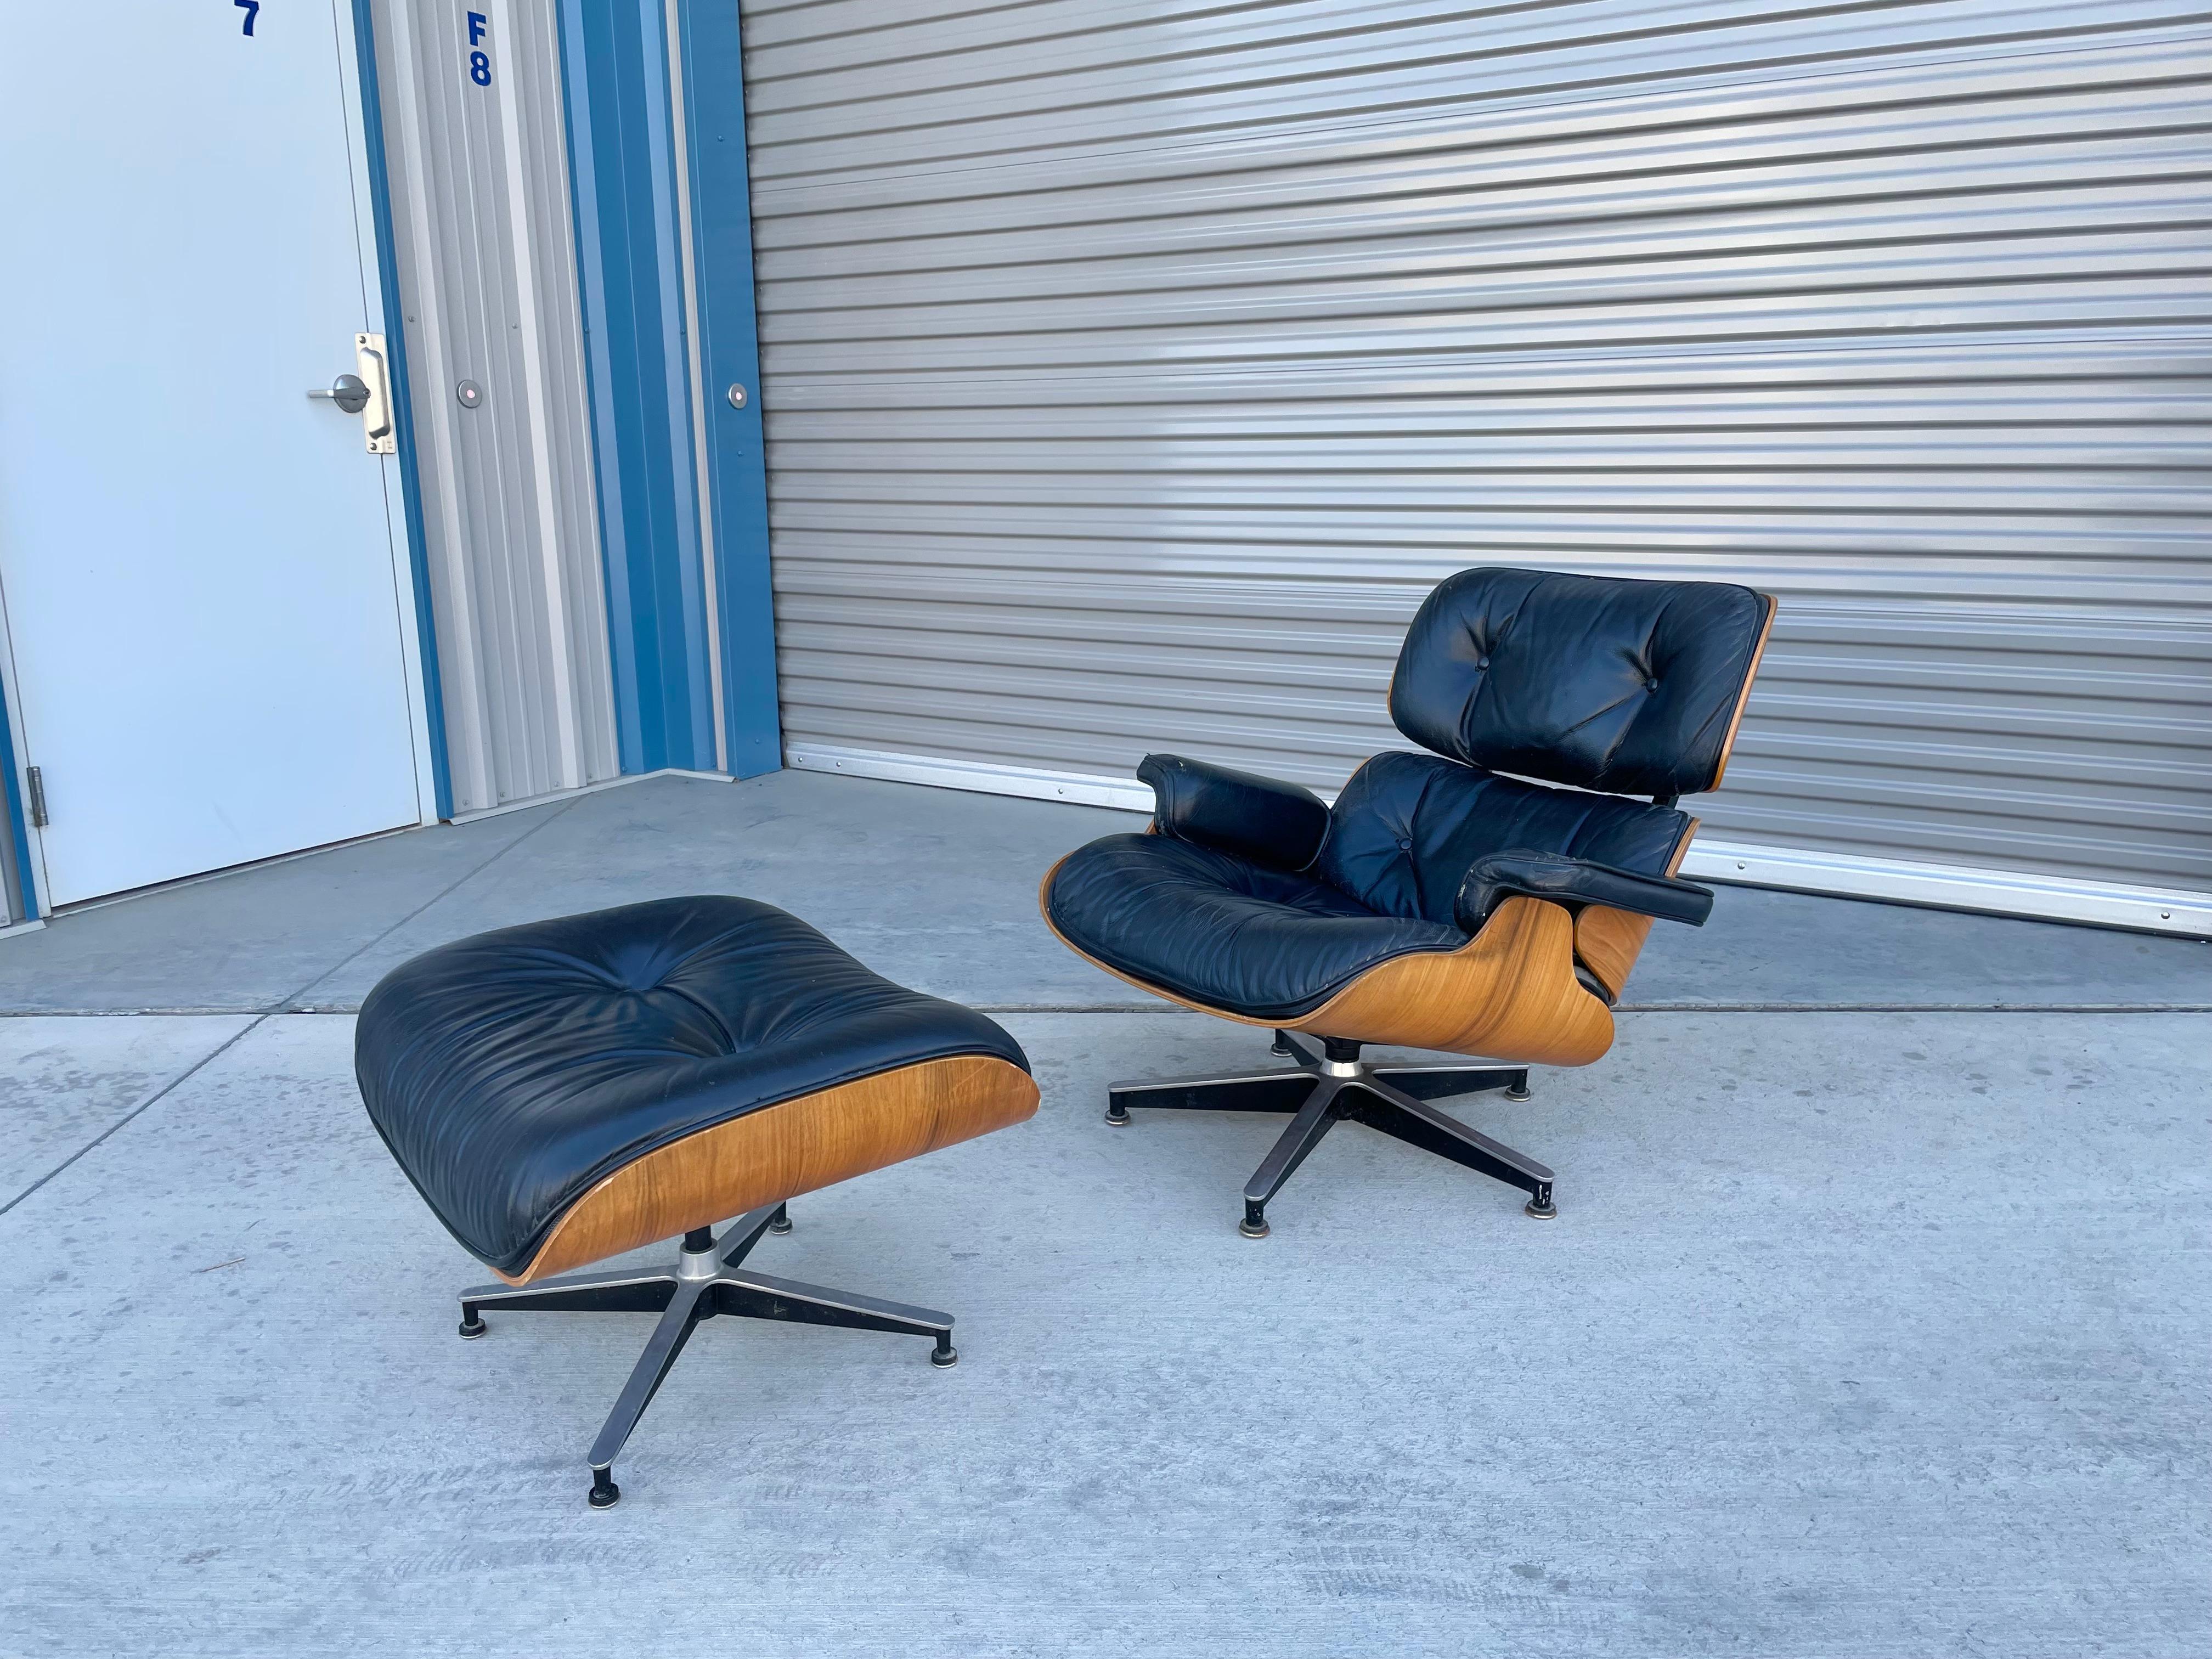 Mid-century chair and ottoman designed and manufactured in the United States circa 1970s. This beautiful chair and ottoman was styled after Herman Miller. This set features a walnut frame with a black leather upholstery, a classic piece that would